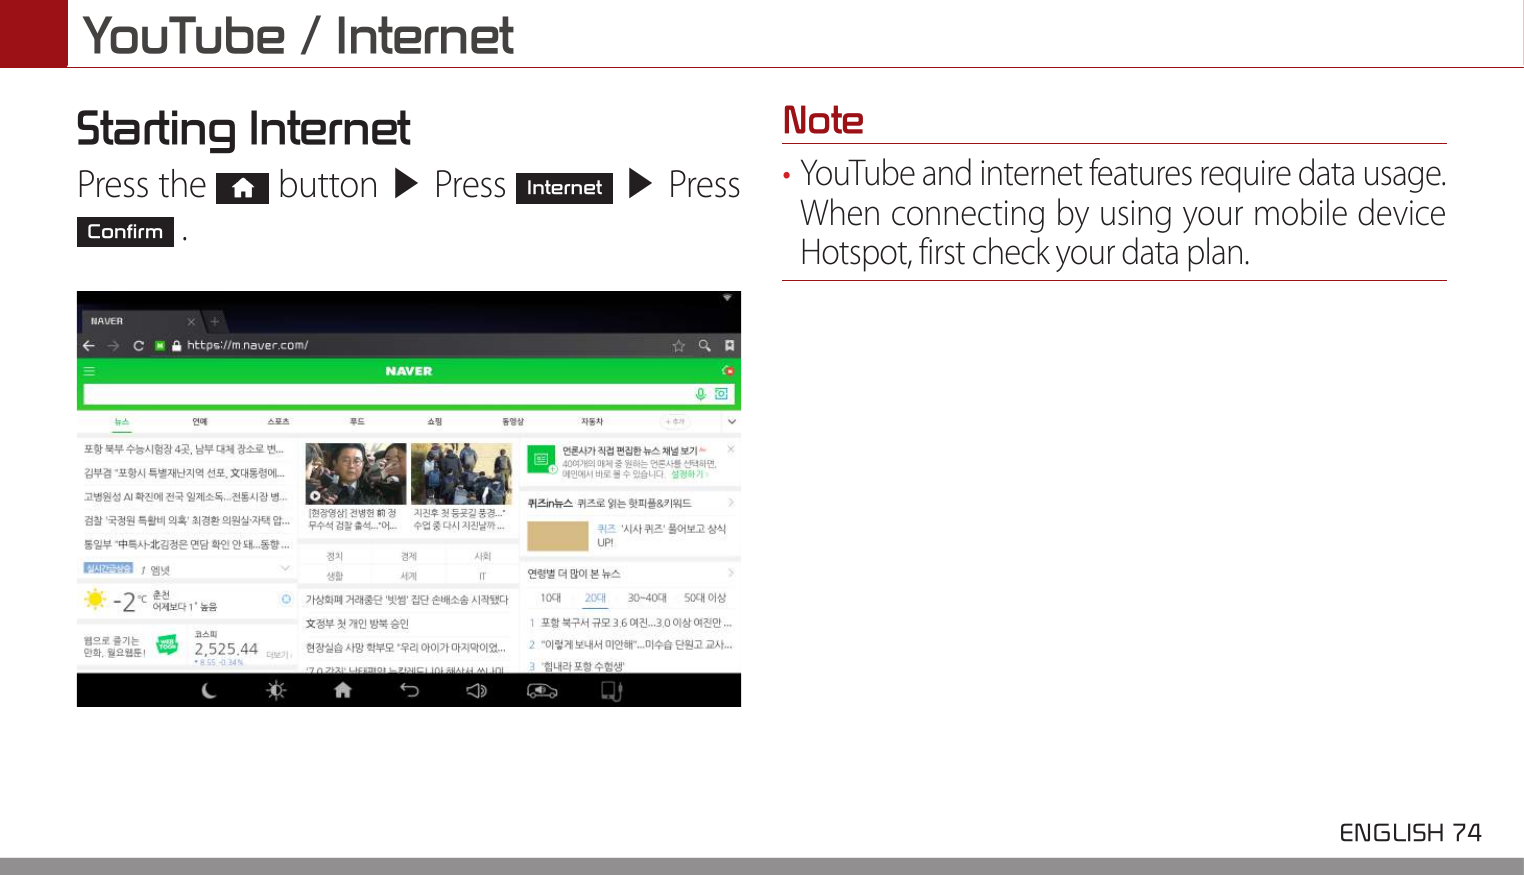 YouTube / Internet ENGLISH 74 Starting InternetPress the   button ▶ Press Internet ▶ Press Confirm .Note• YouTube and internet features require data usage. When connecting by using your mobile device Hotspot, first check your data plan.